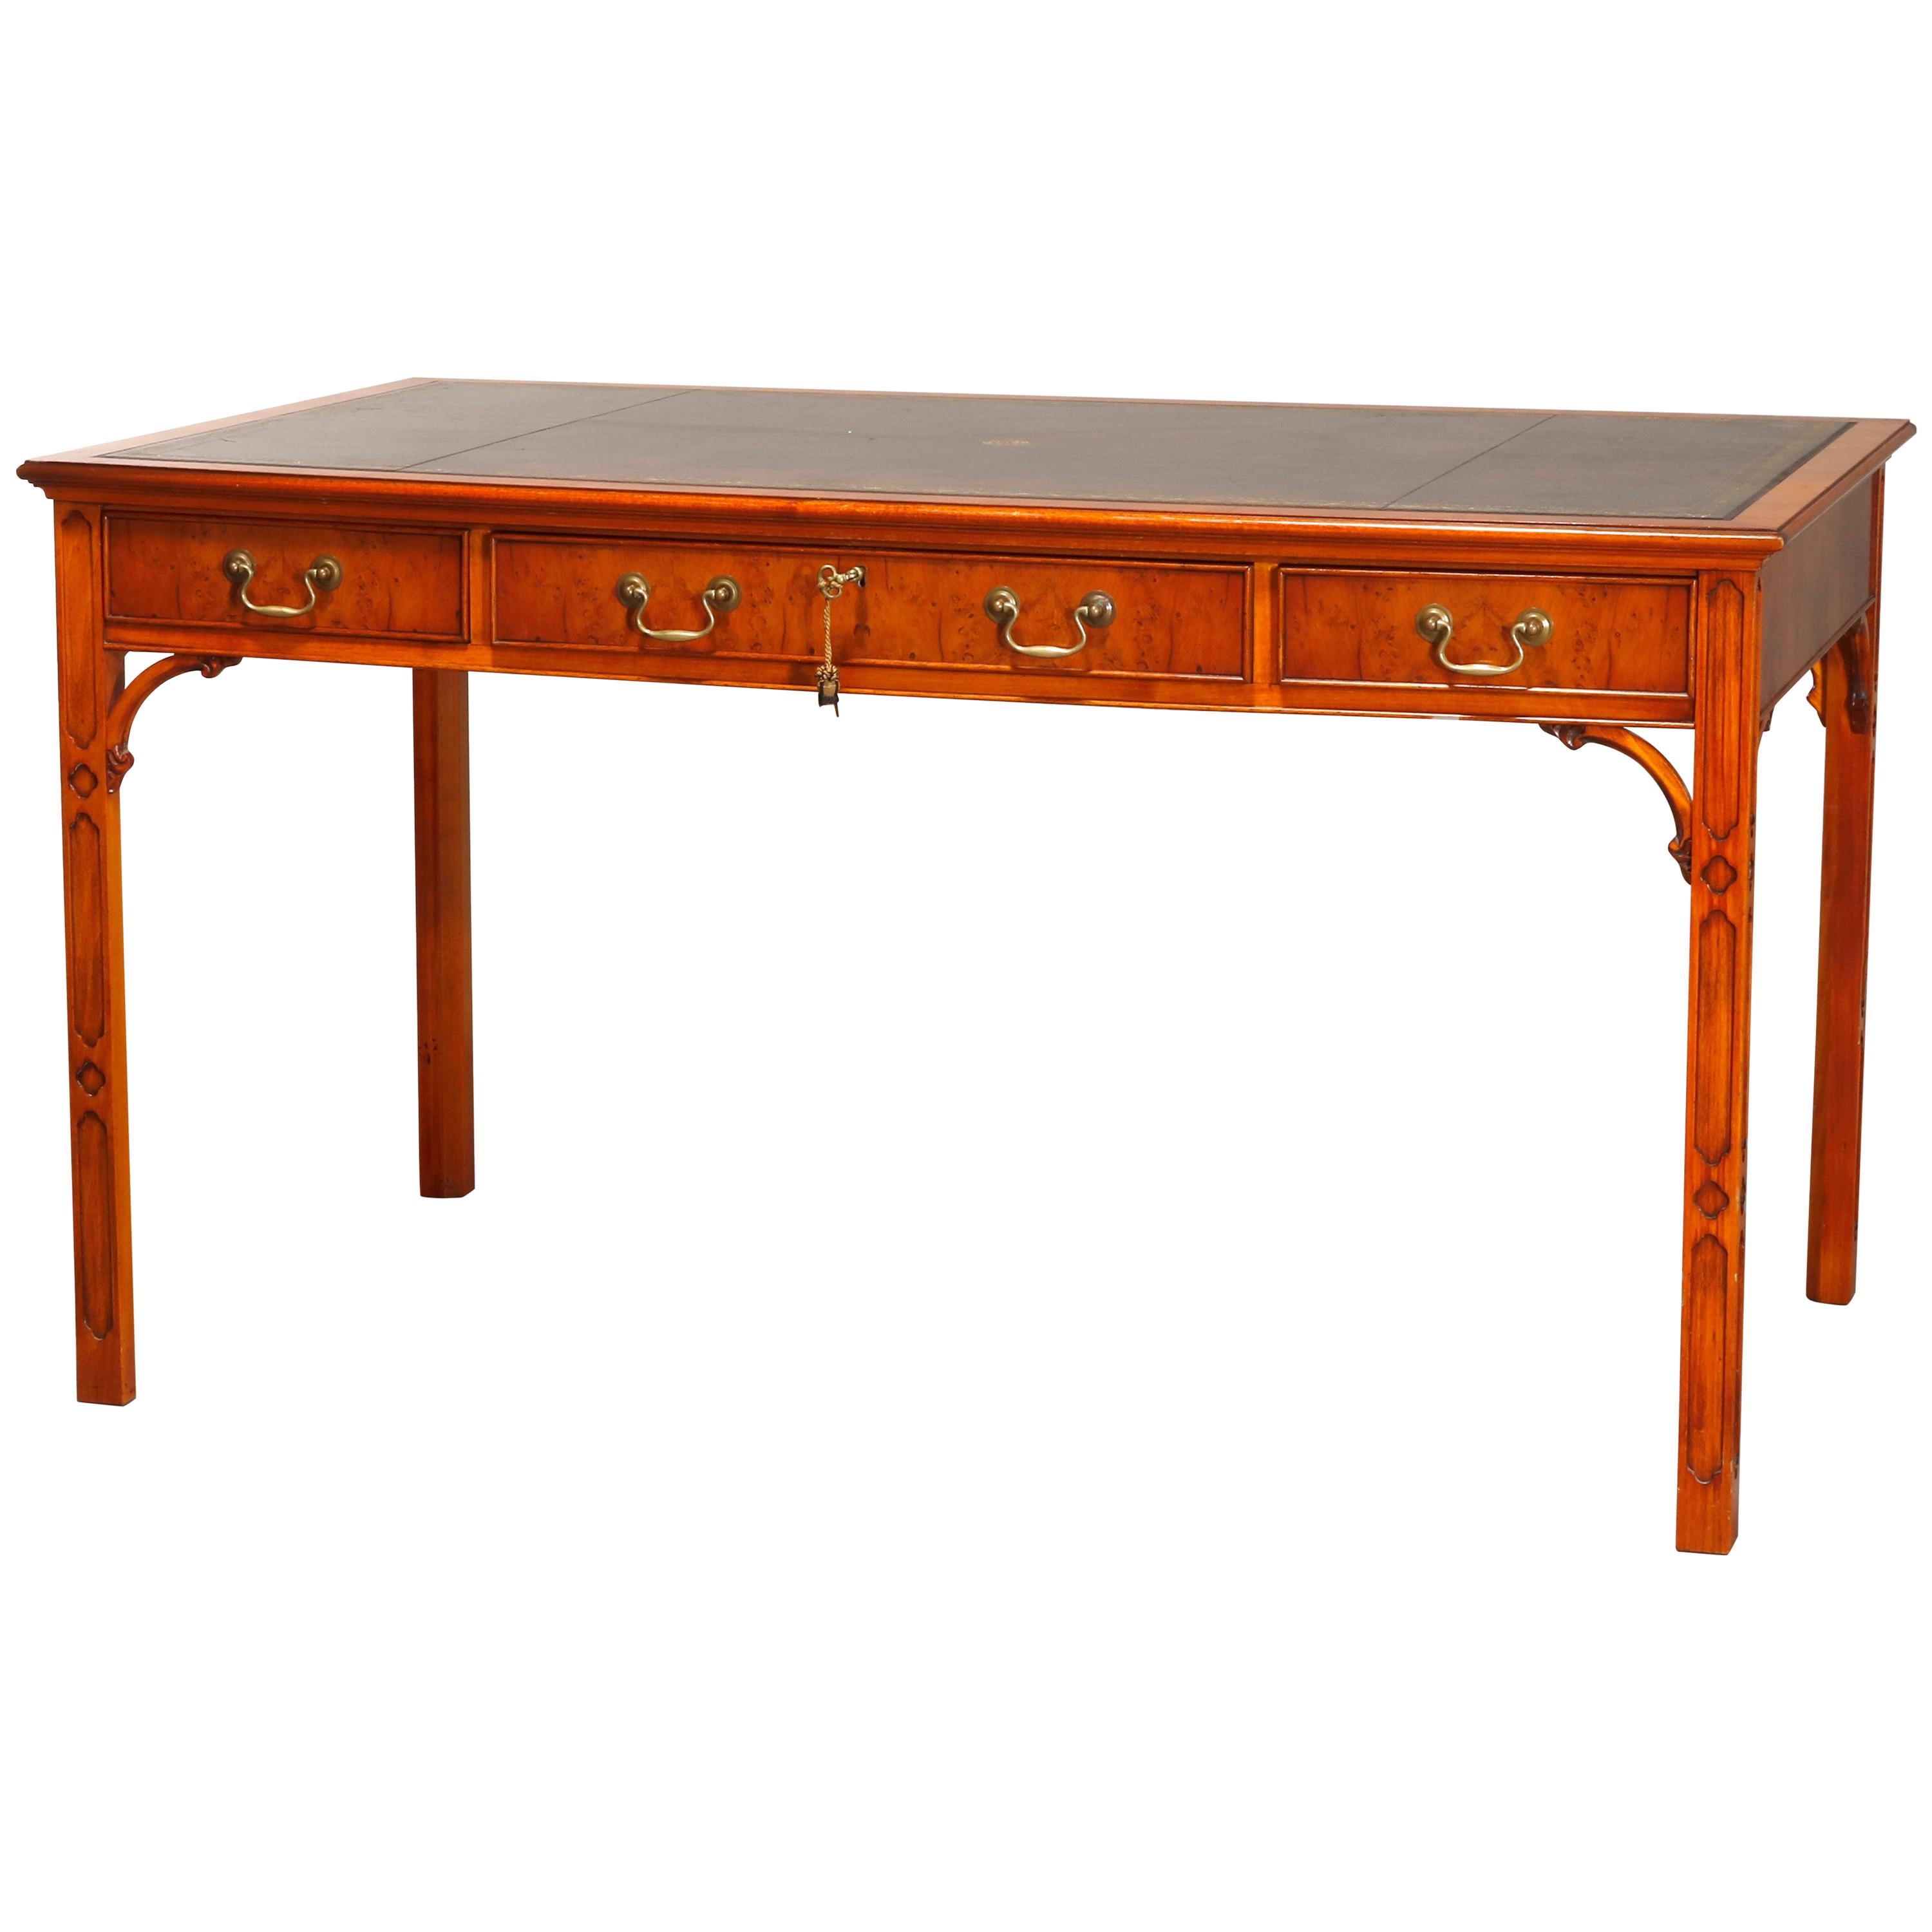 Bevan Funnell English Chinese Chippendale Mahogany & Olivewood Desk, 20th C